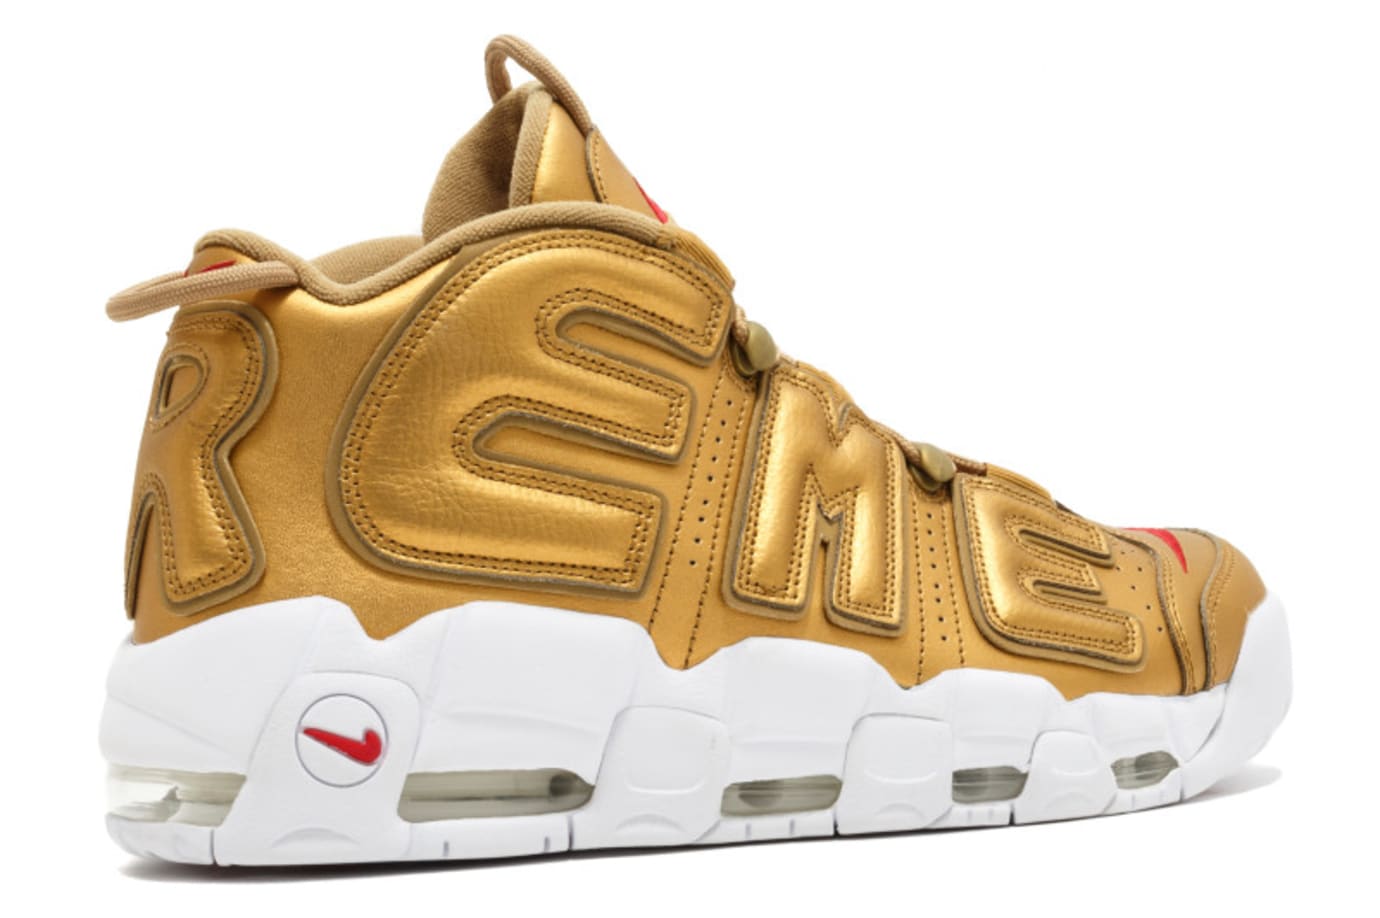 Supreme Nike Air More Uptempo Gold Release Date Heel Angle 902290-700